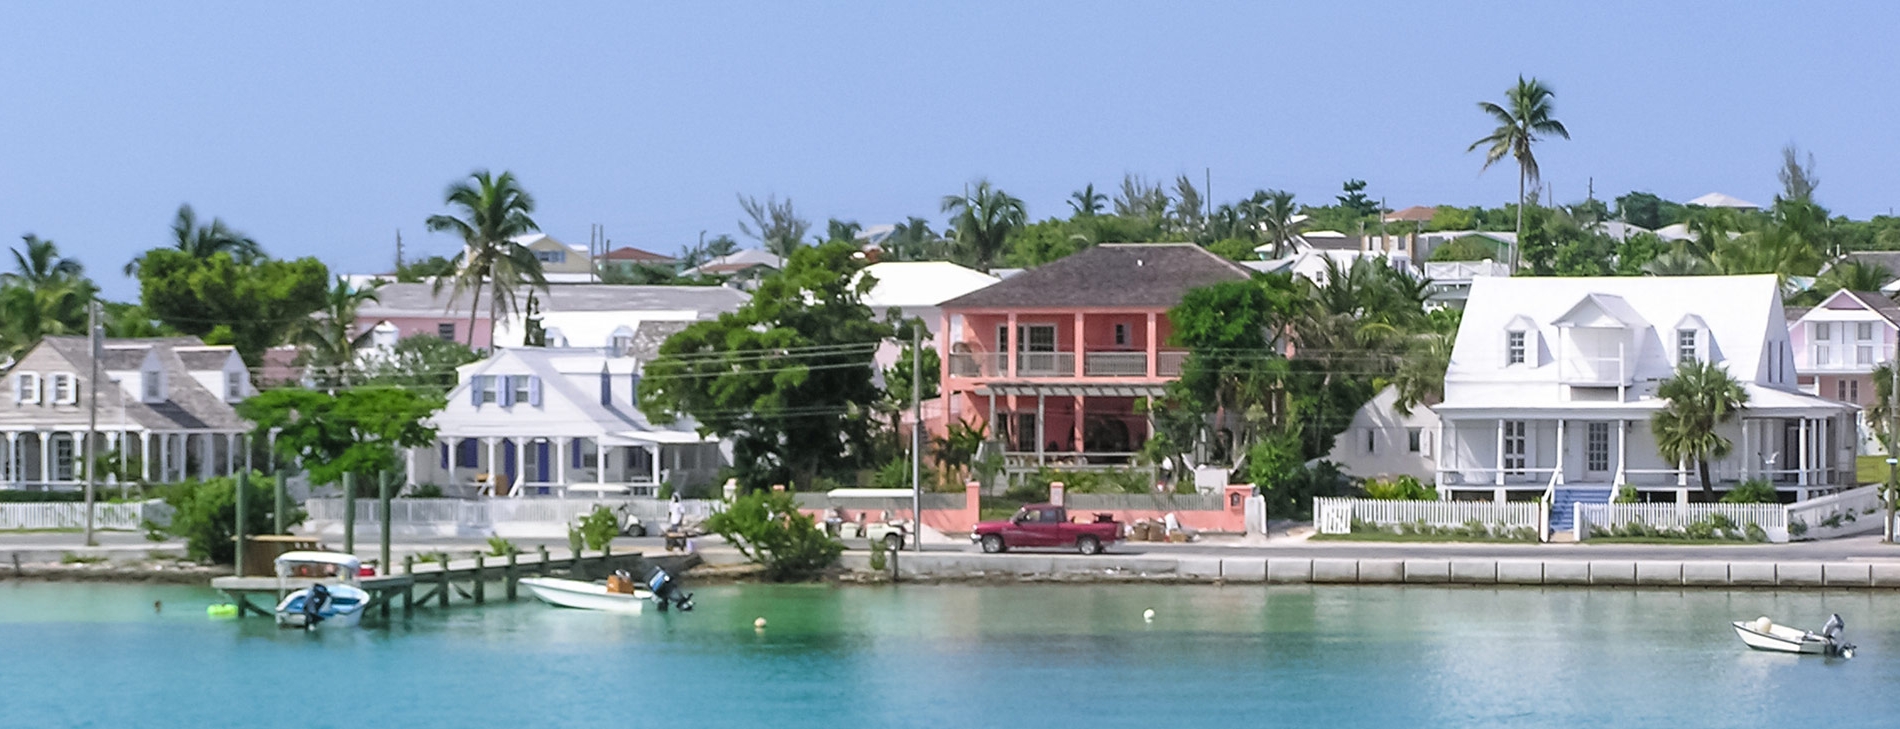 Harbour Island Eleuthera Bahamas Flights And Hotel Bookings 3866